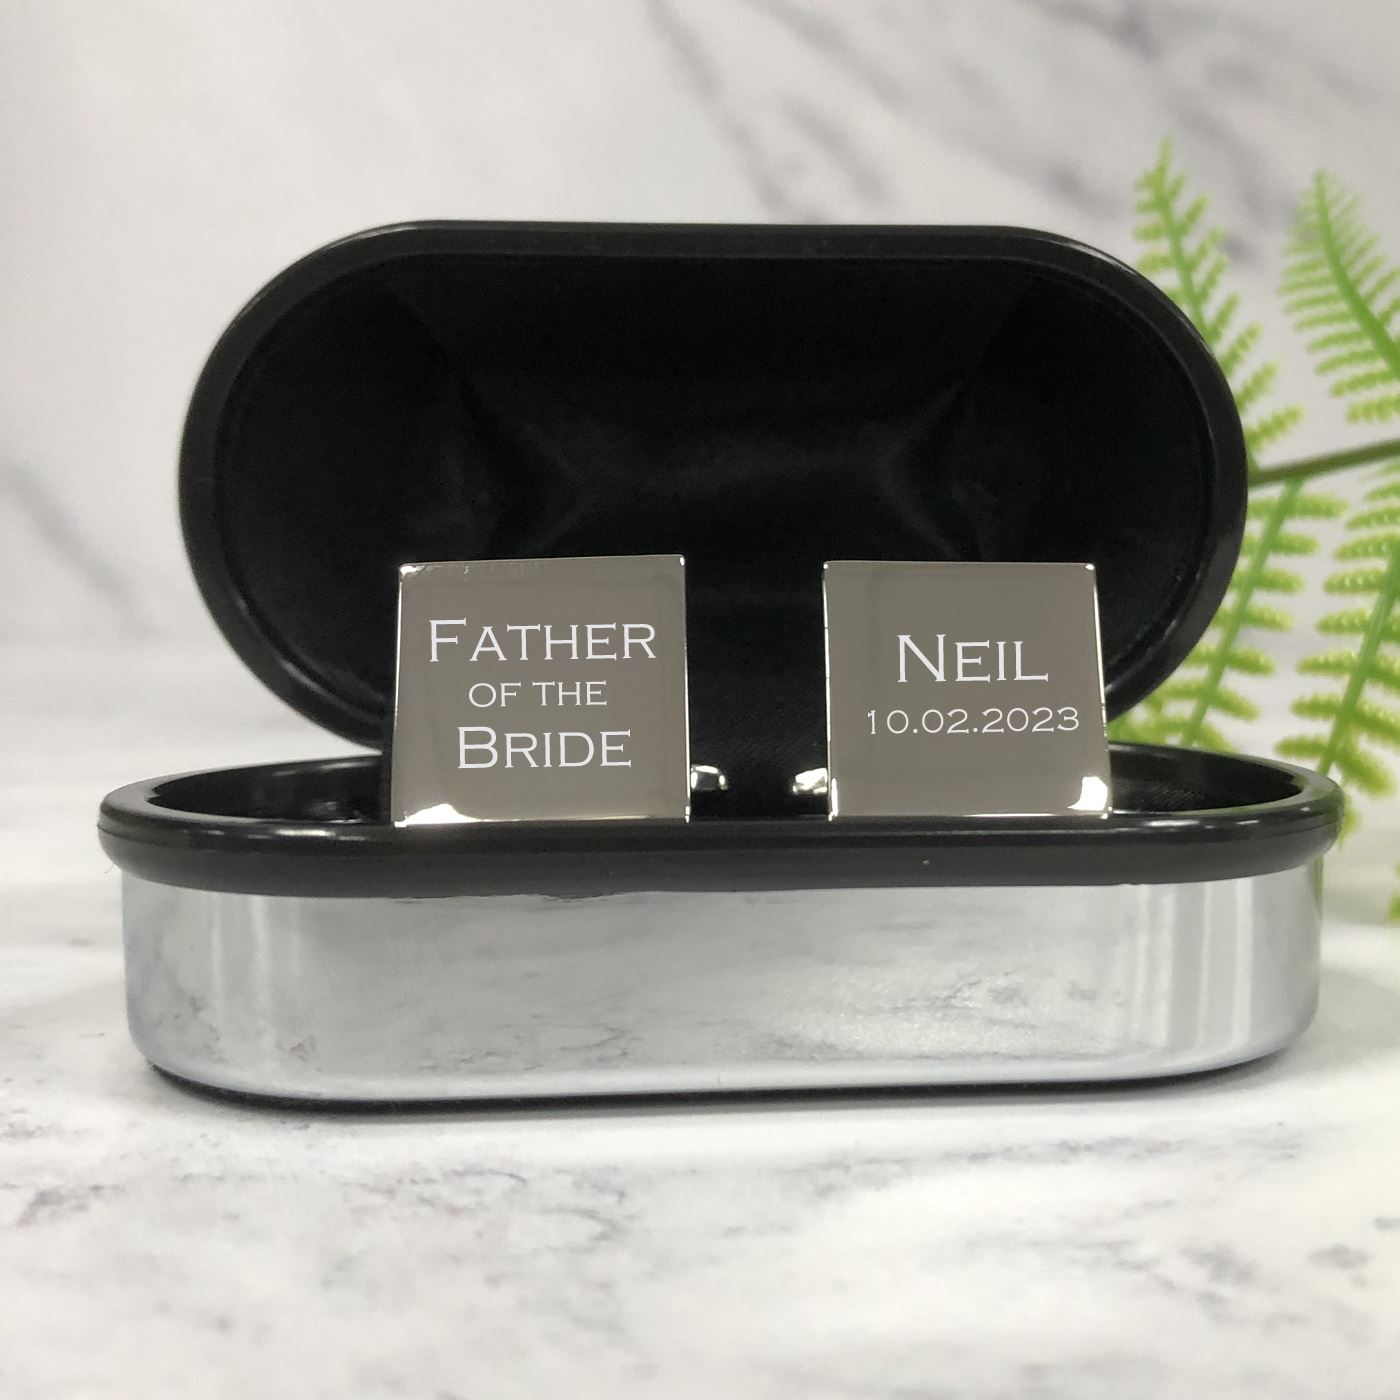 Personalised Square Wedding Cufflinks - Father Of The Bride